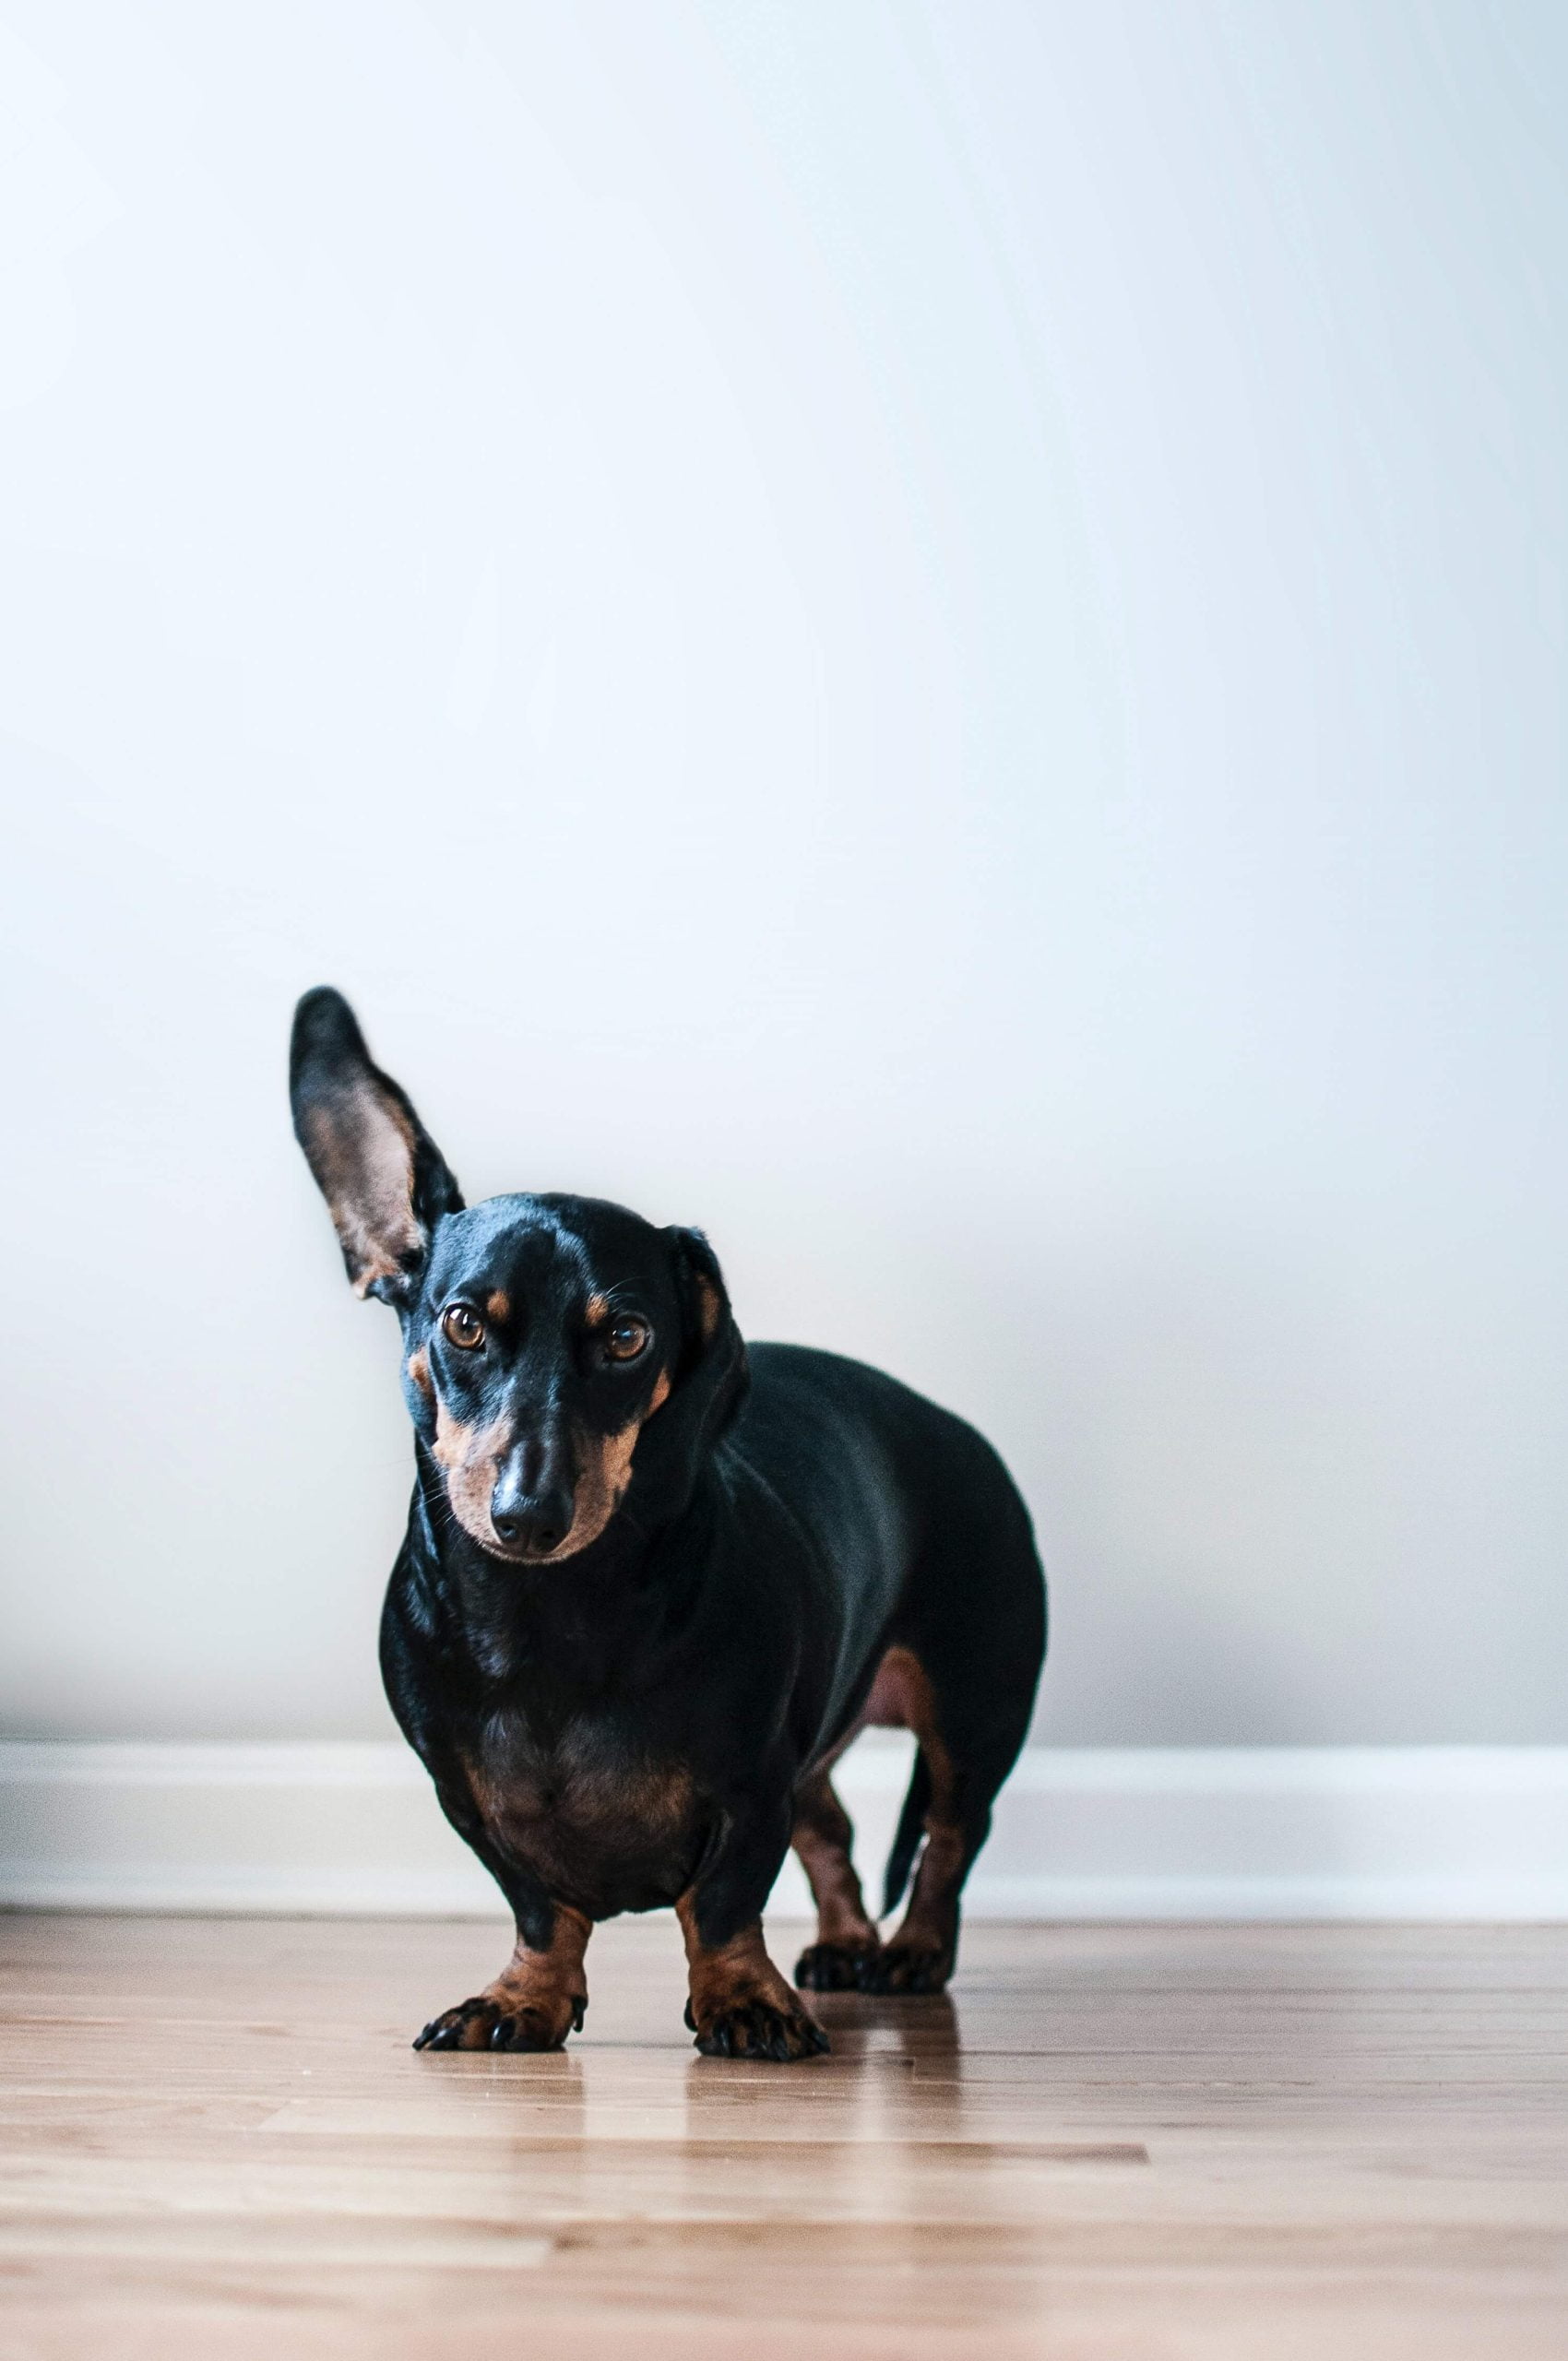 How can diet help dachshund stomach issues?